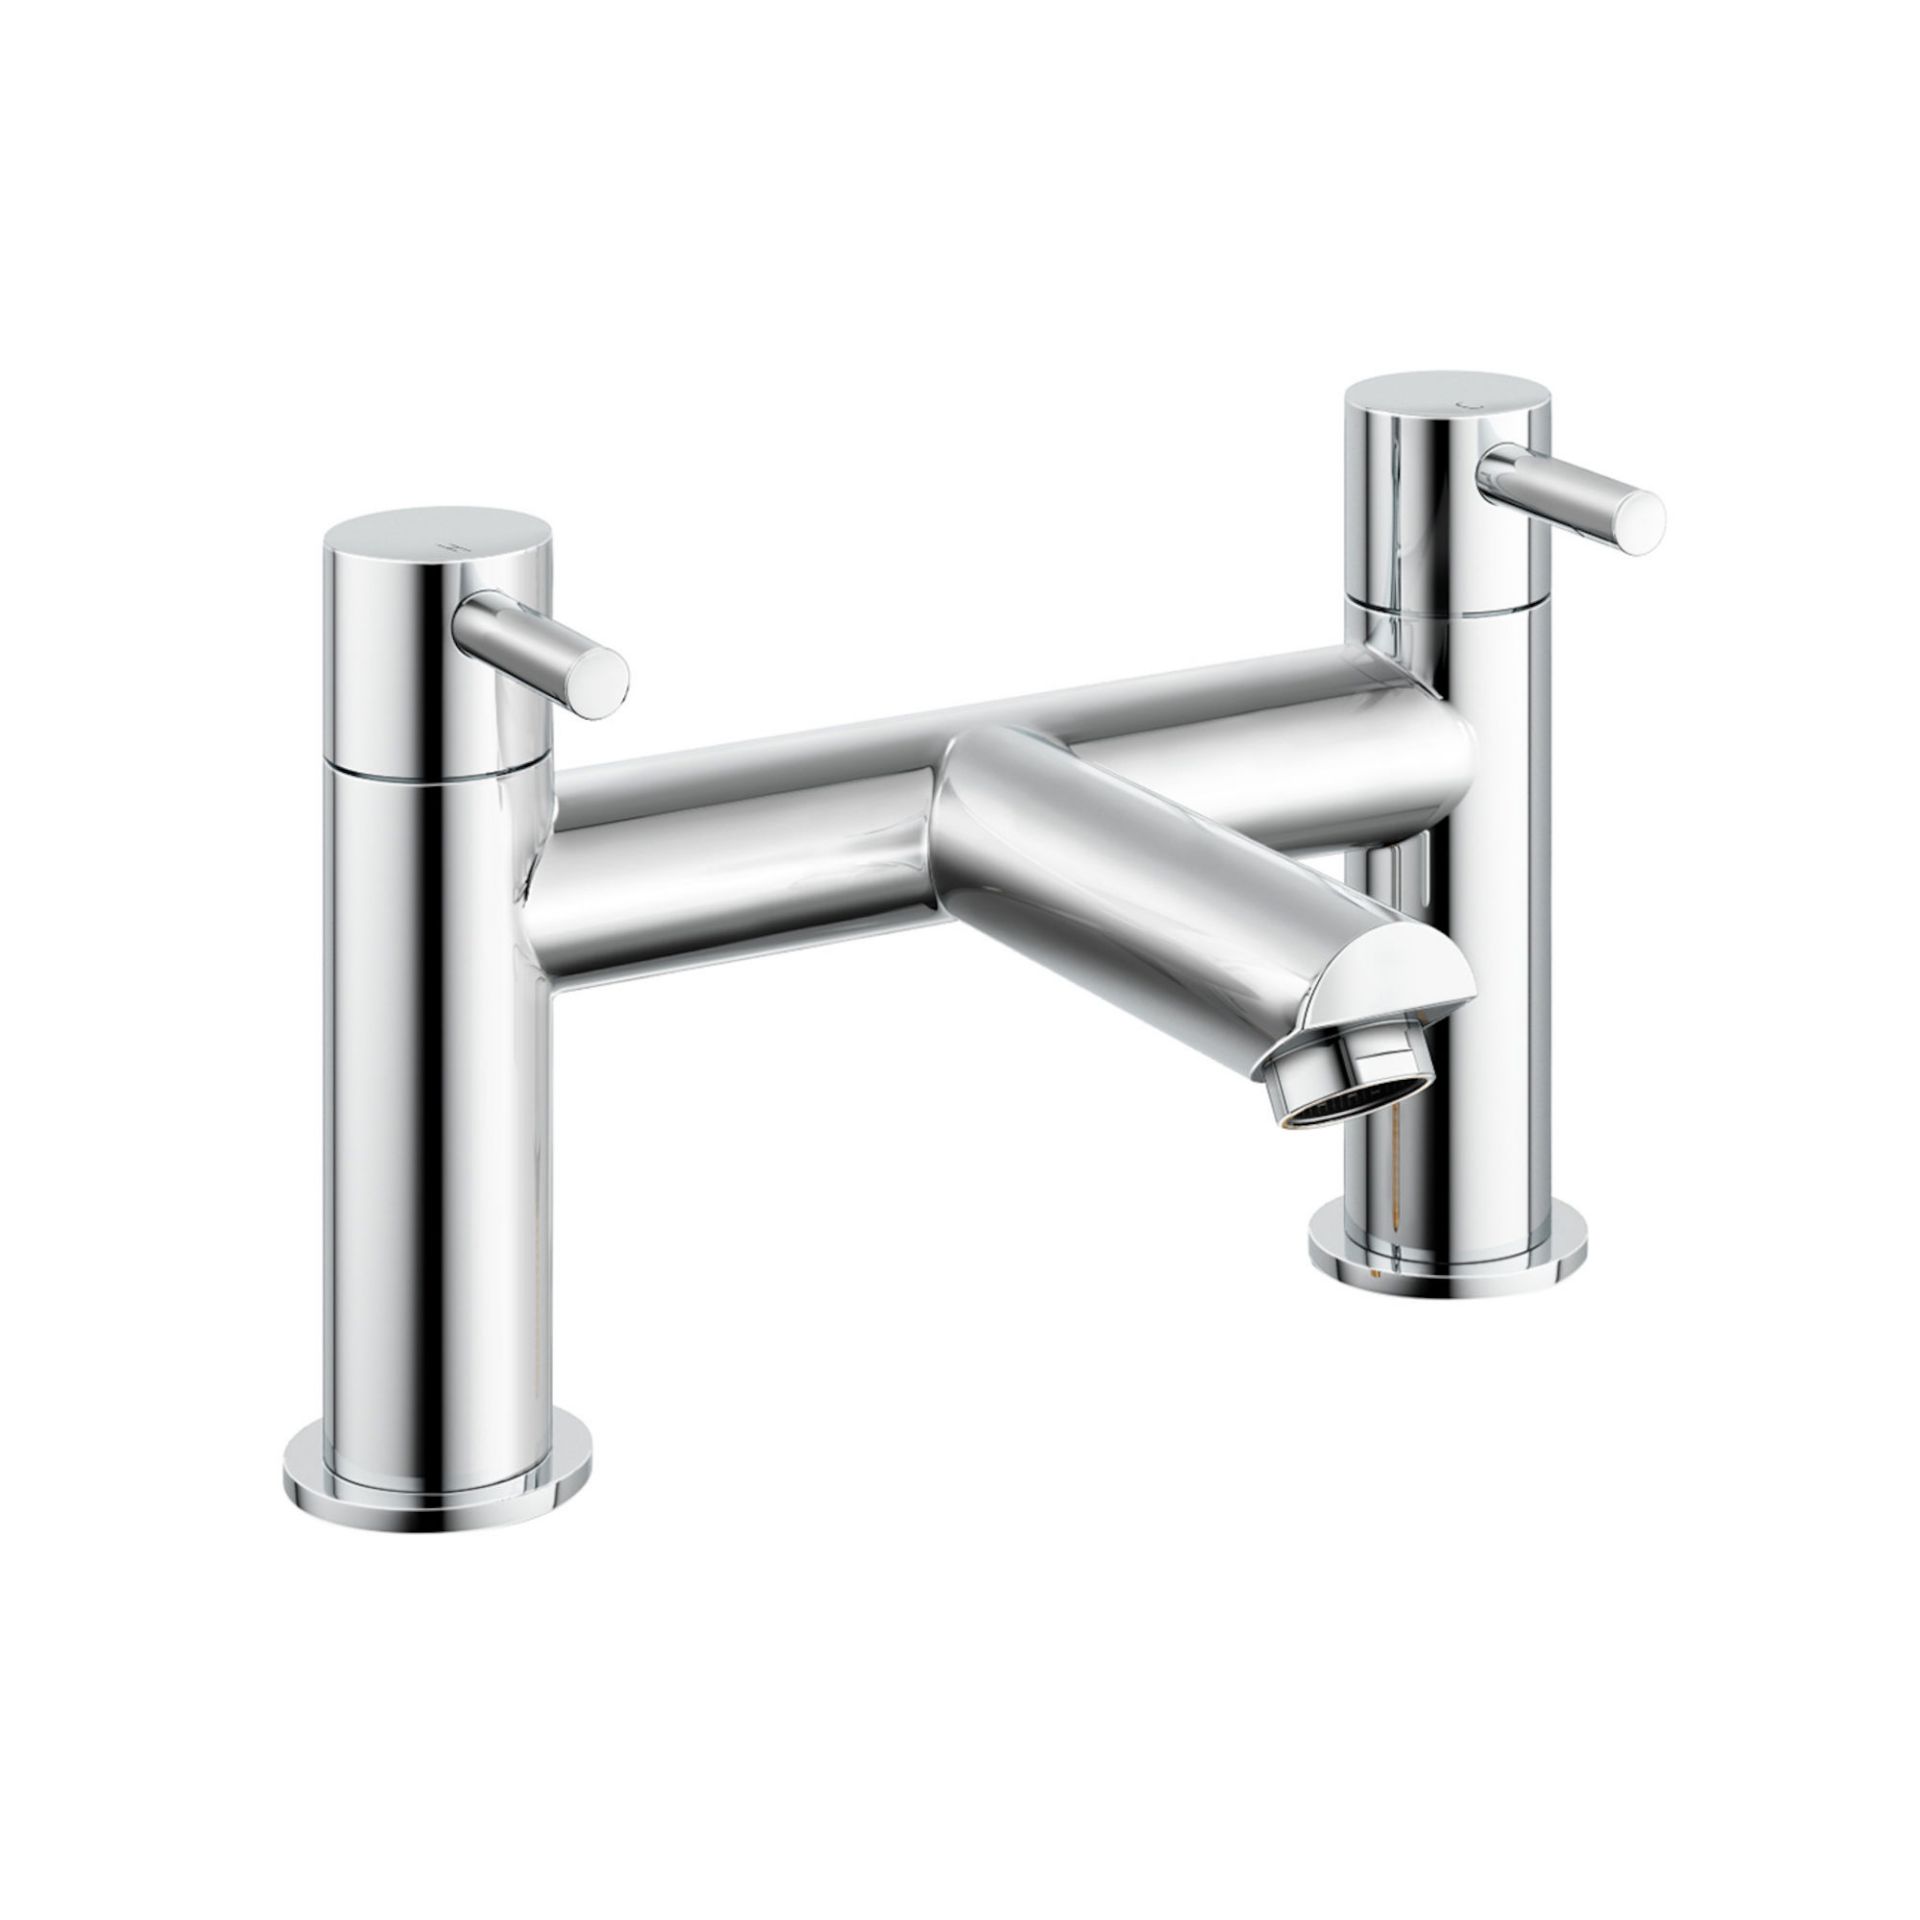 (VN48) Gladstone II Bath Filler Mixer Tap Chrome Plated Solid Brass 1/4 turn solid brass valve - Image 2 of 2